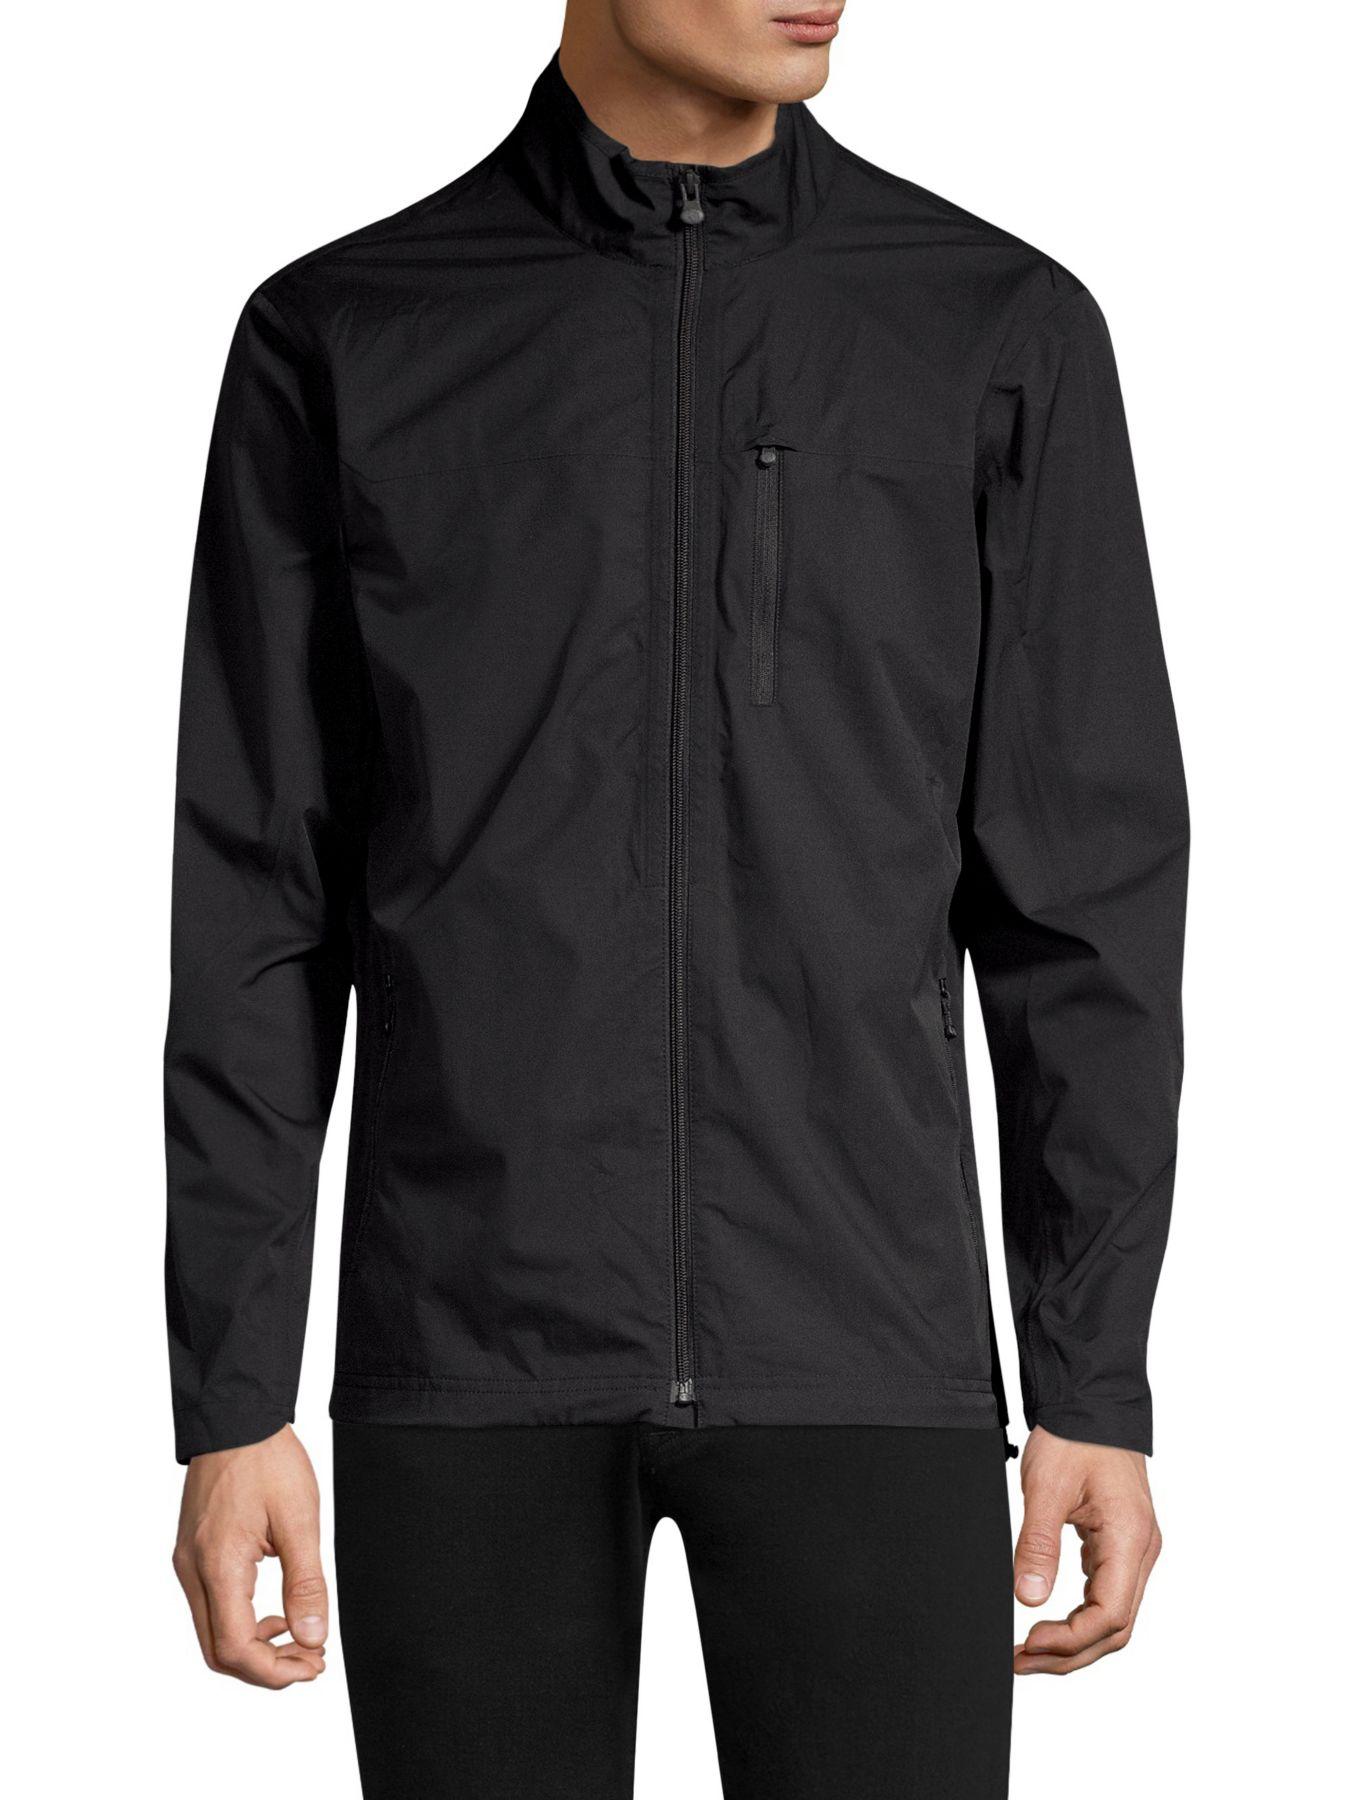 Greyson Chenoa Pebble Packable Jacket in Black for Men | Lyst